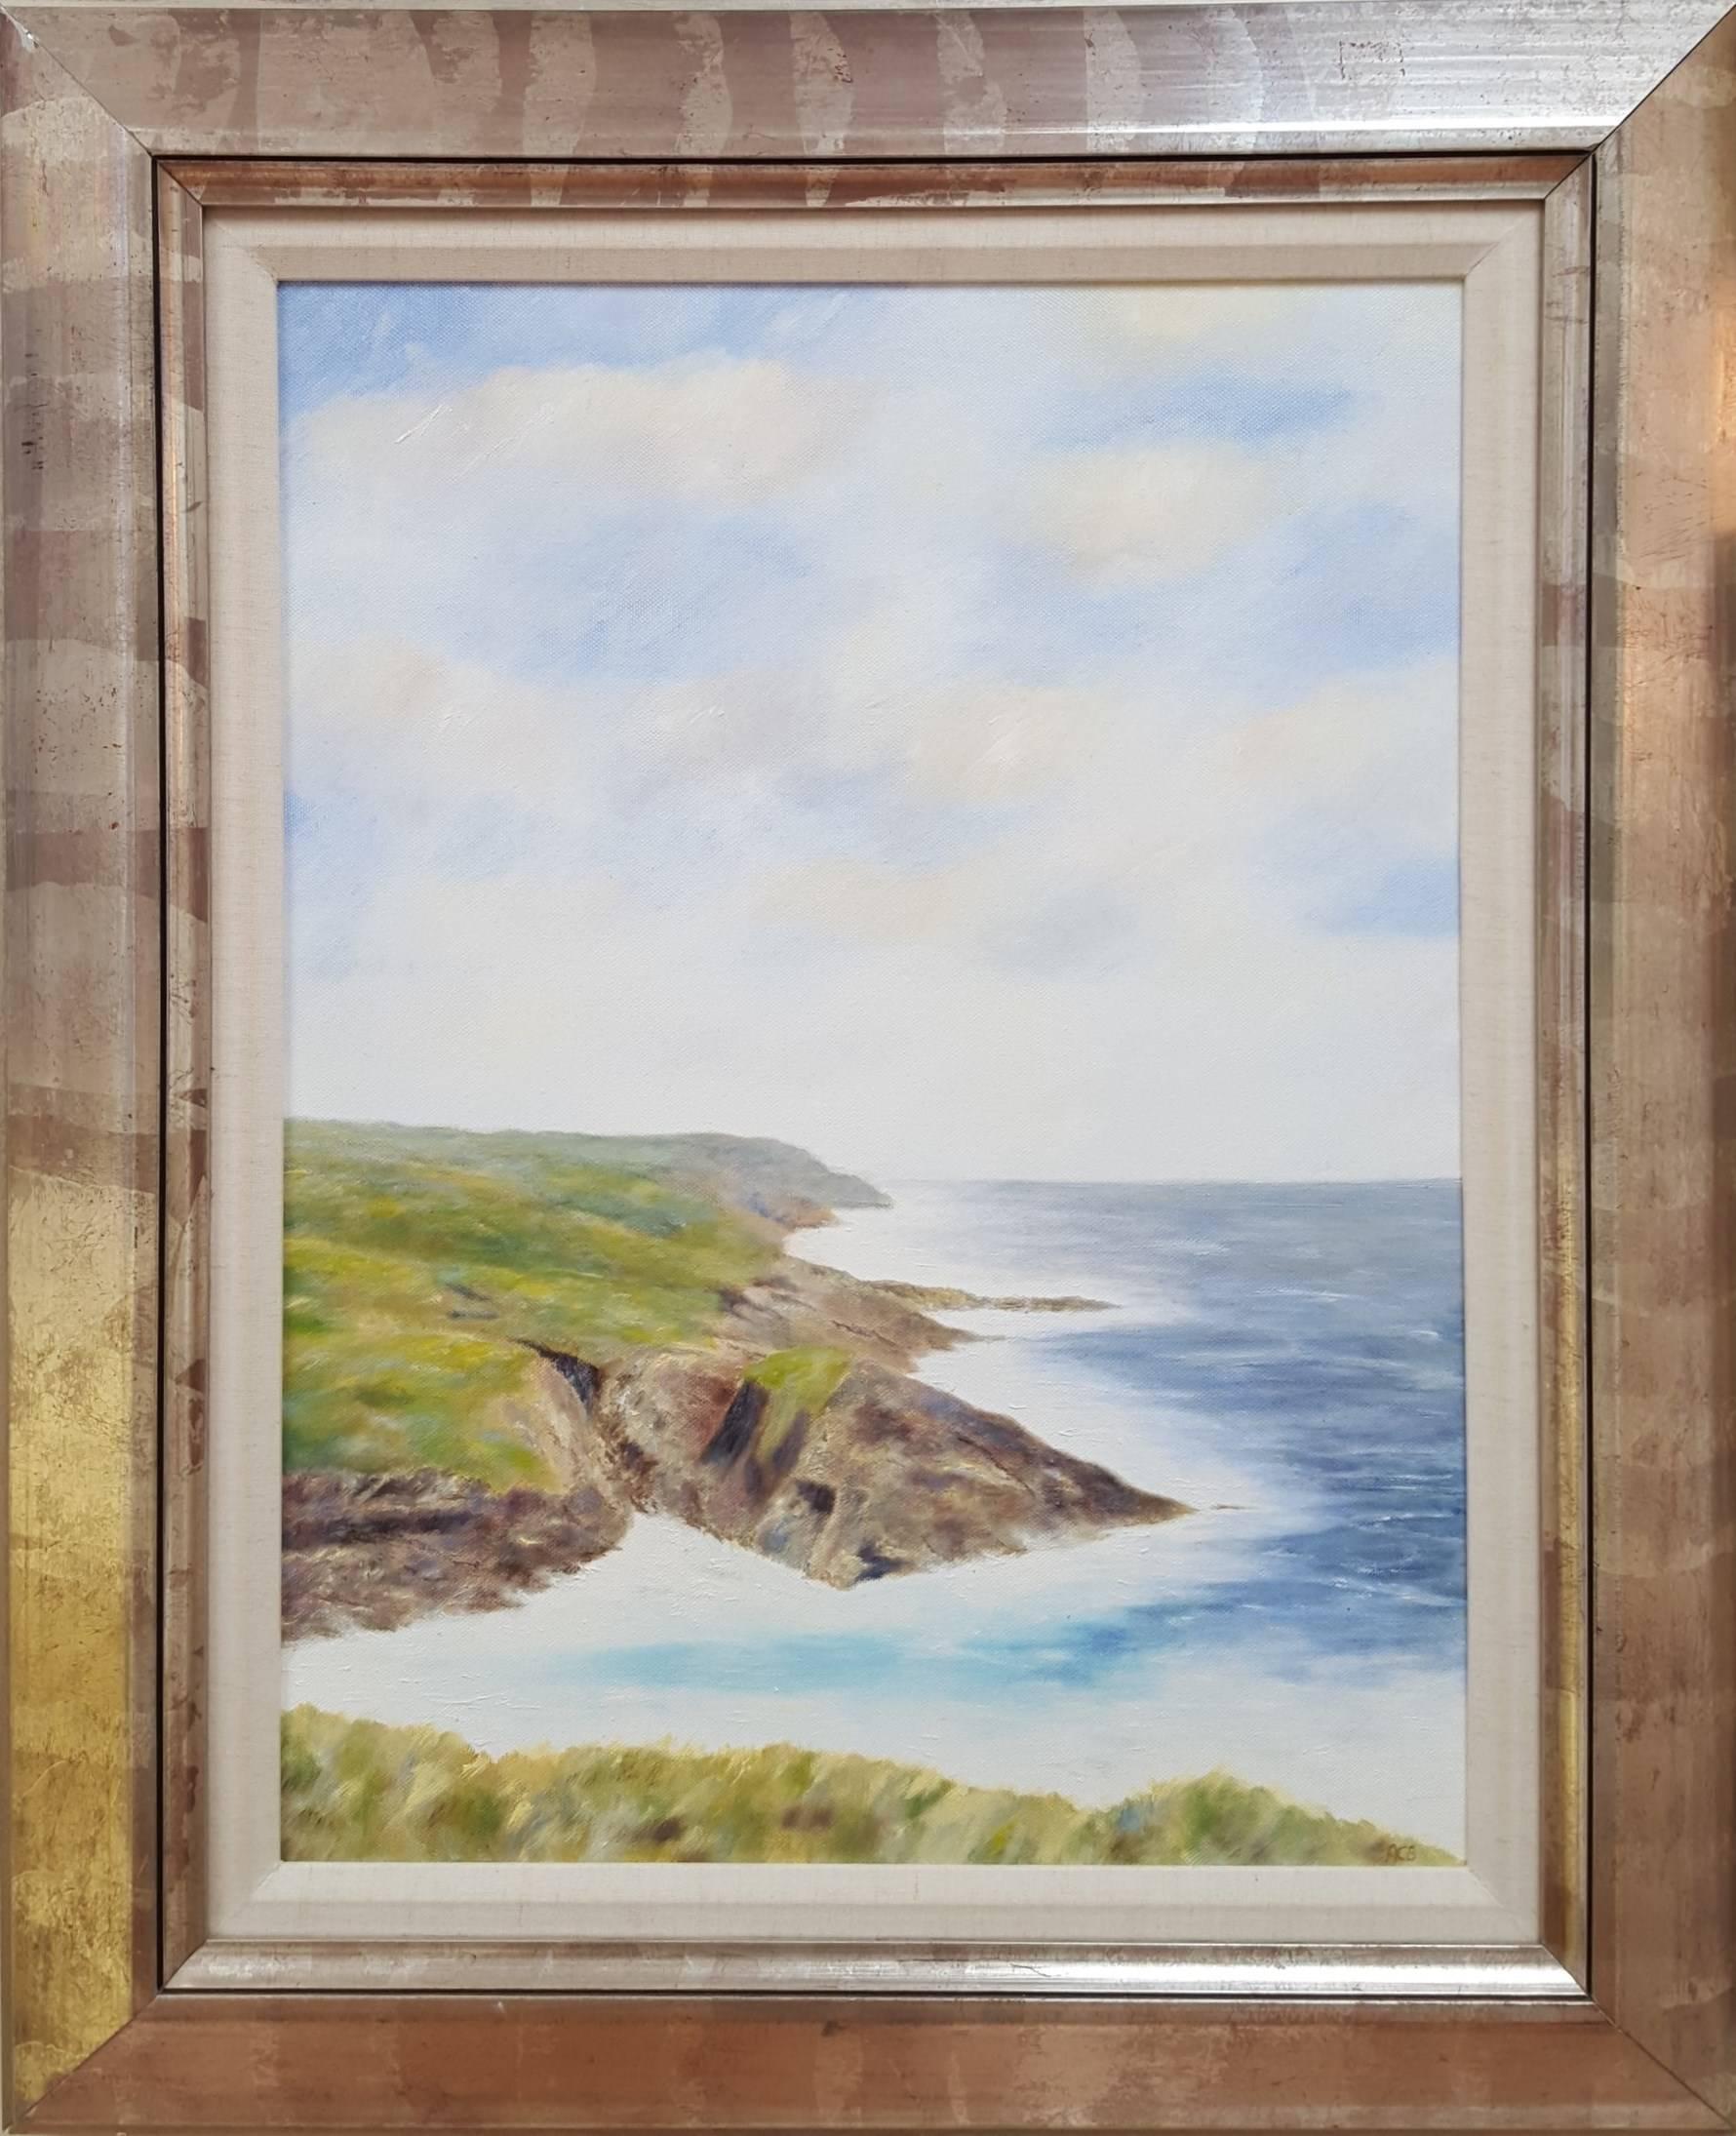 Pendeen Coast, Cornwall - Painting by Alastair Campbell-Binning